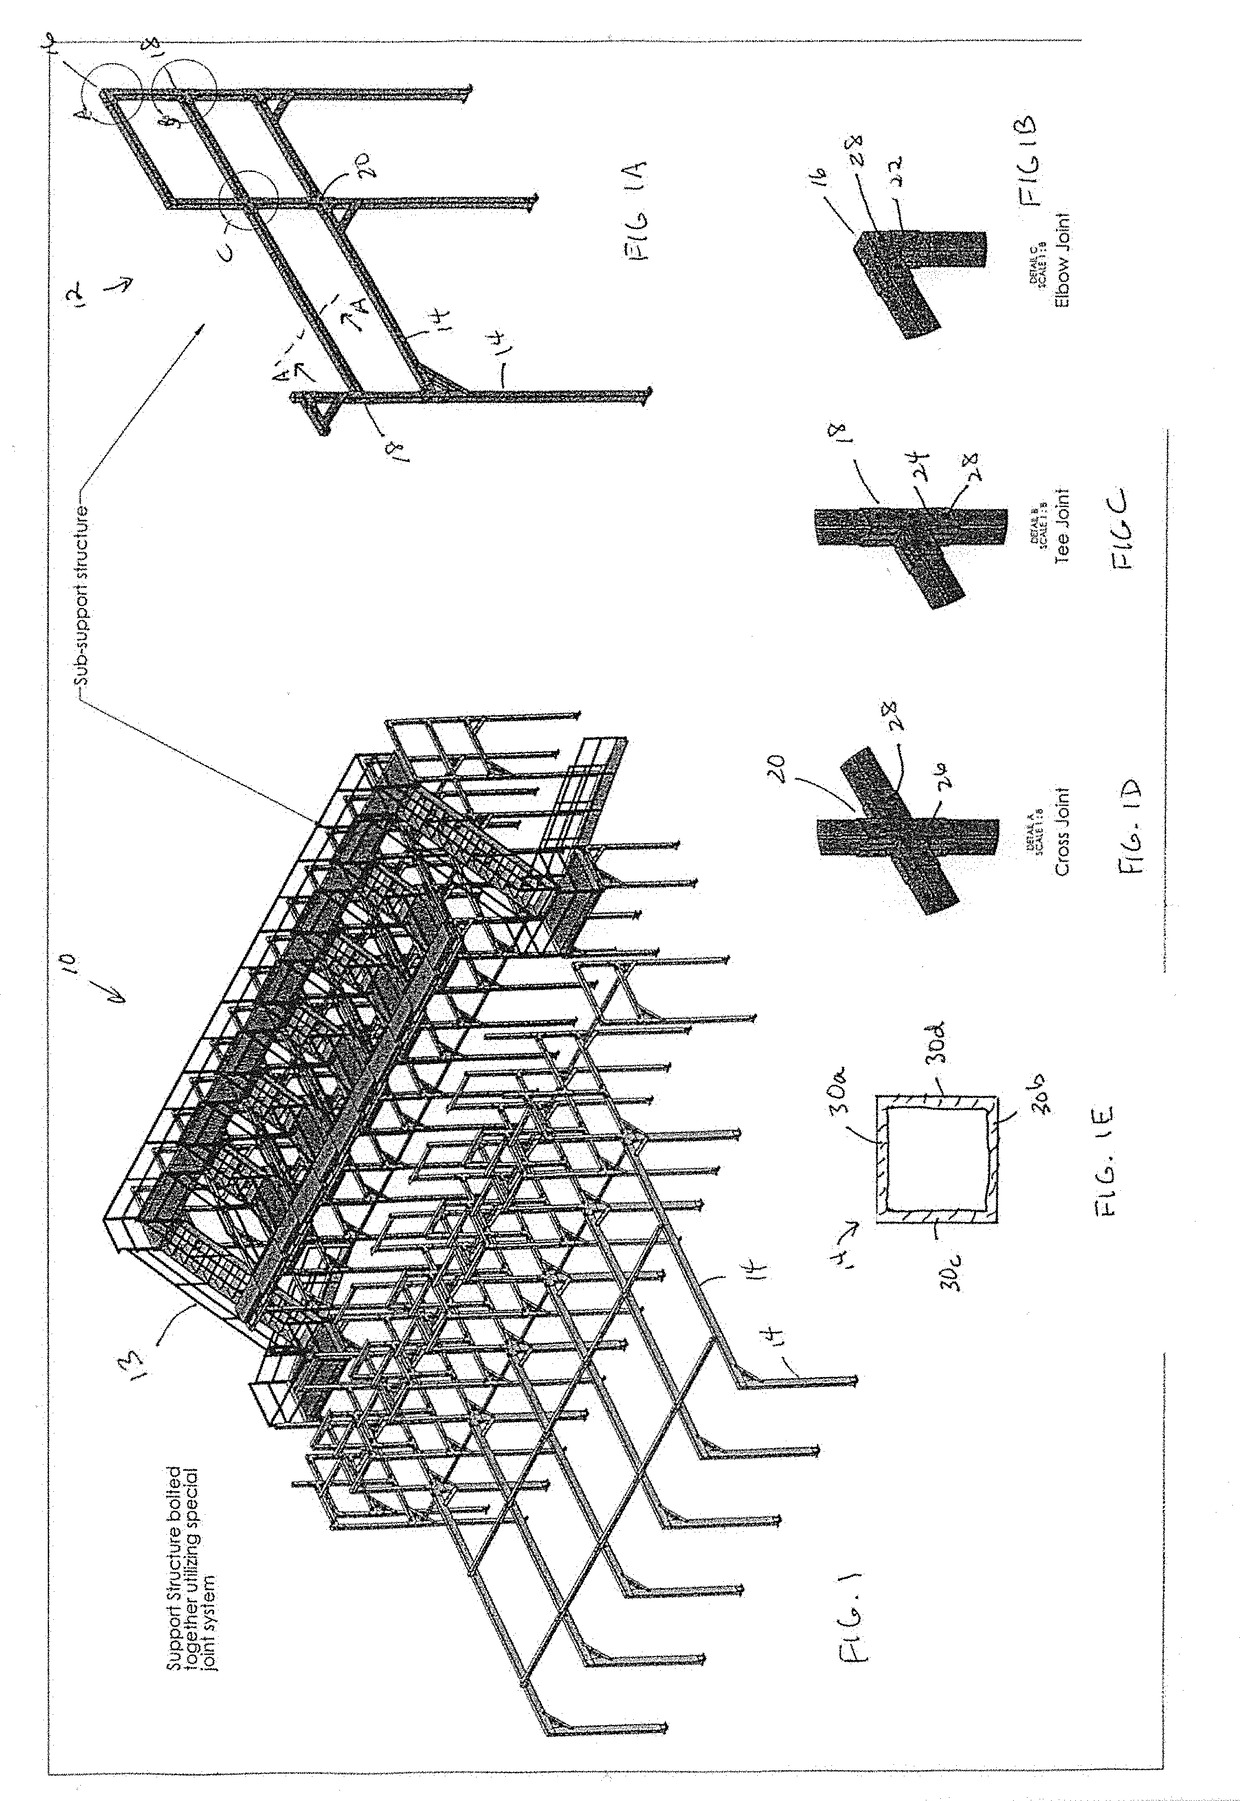 Tubular mezzanine and conveyor support structures and stiffener brackets for assembly thereof